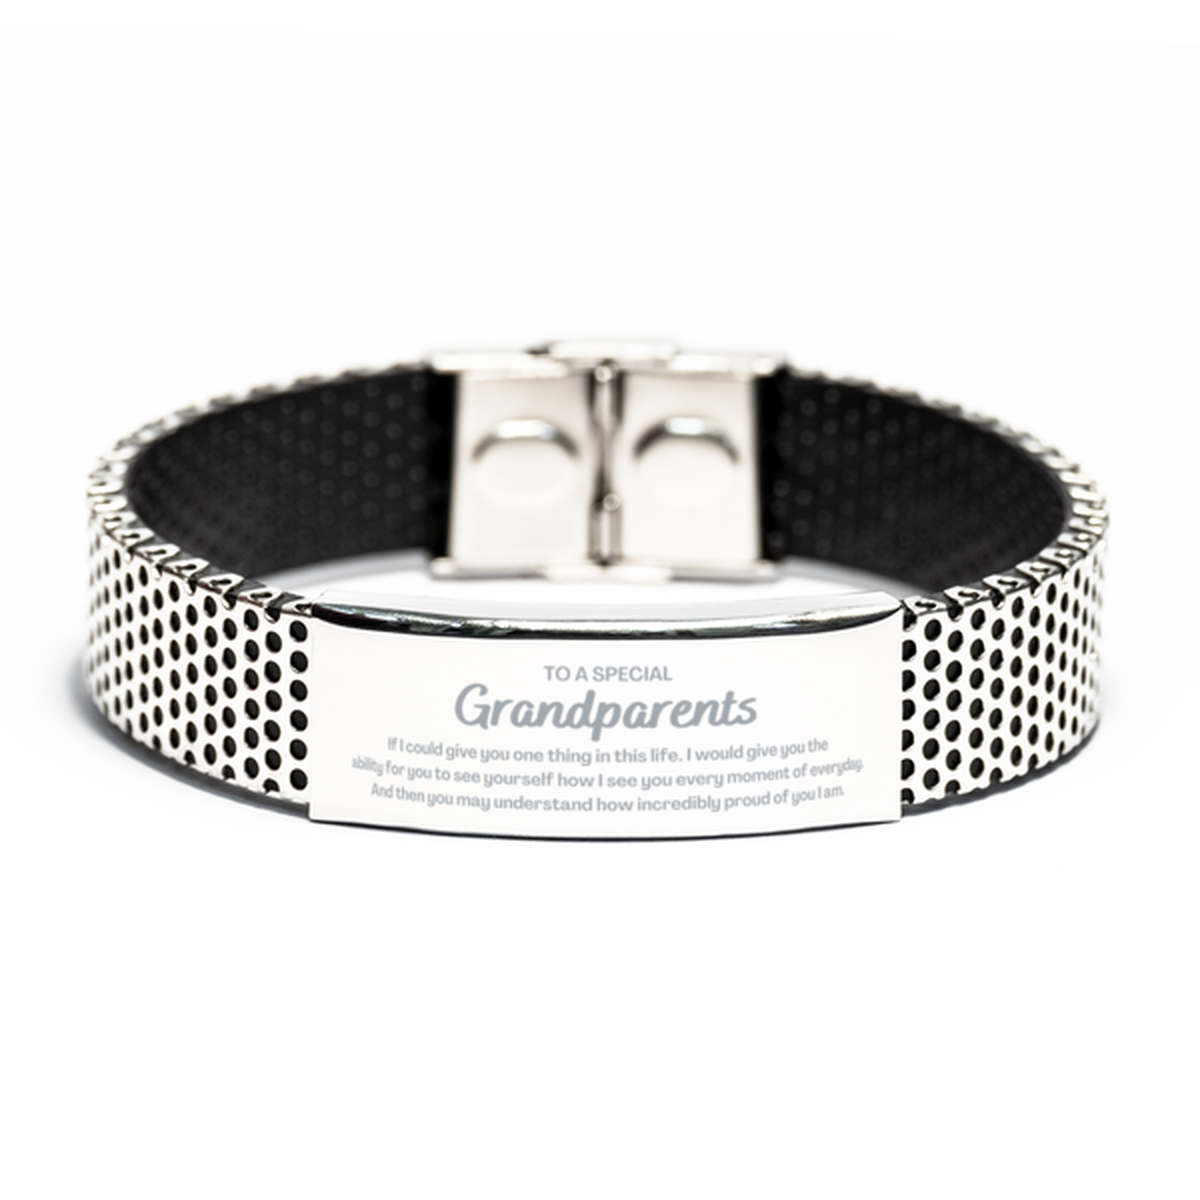 To My Grandparents Stainless Steel Bracelet, Gifts For Grandparents Engraved, Inspirational Gifts for Christmas Birthday, Epic Gifts for Grandparents To A Special Grandparents how incredibly proud of you I am